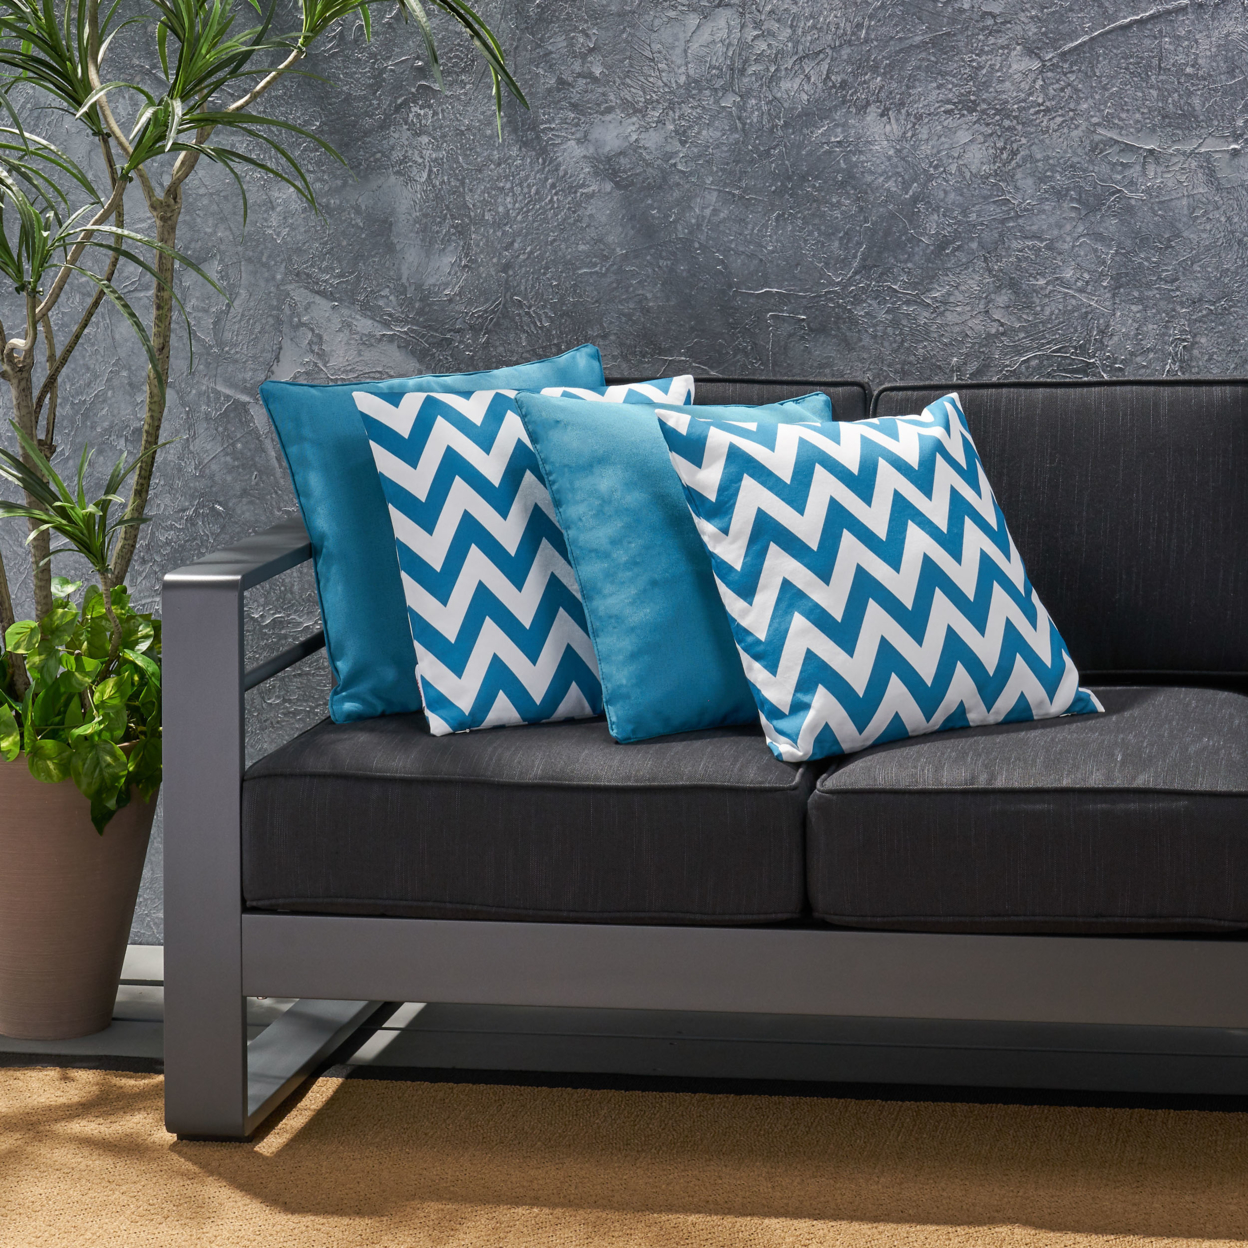 La Jolla Outdoor Striped Water Resistant Square Throw Pillows - Set Of 4 - Dark Teal/White - Zigzag